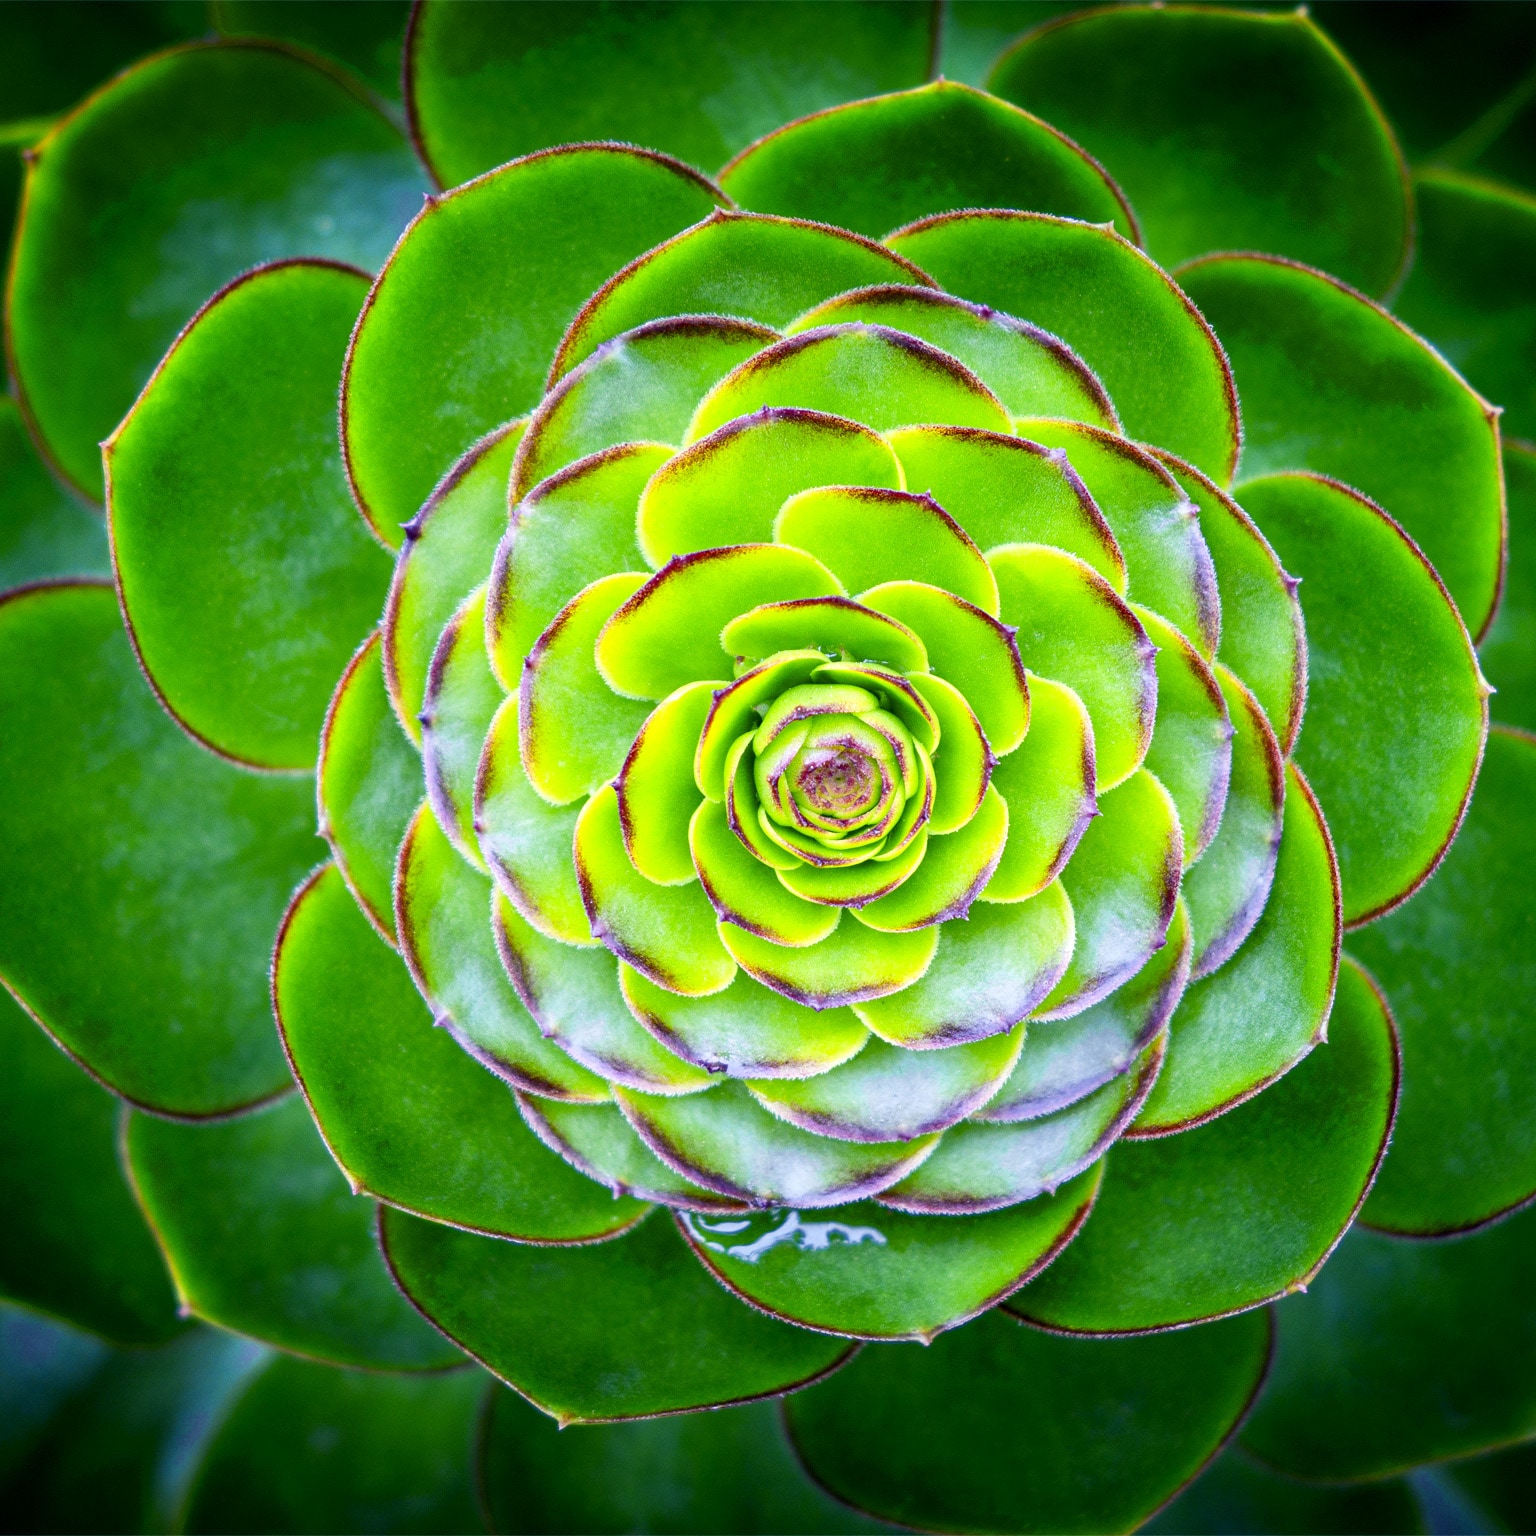 Image of a vibrant green succulent plant.